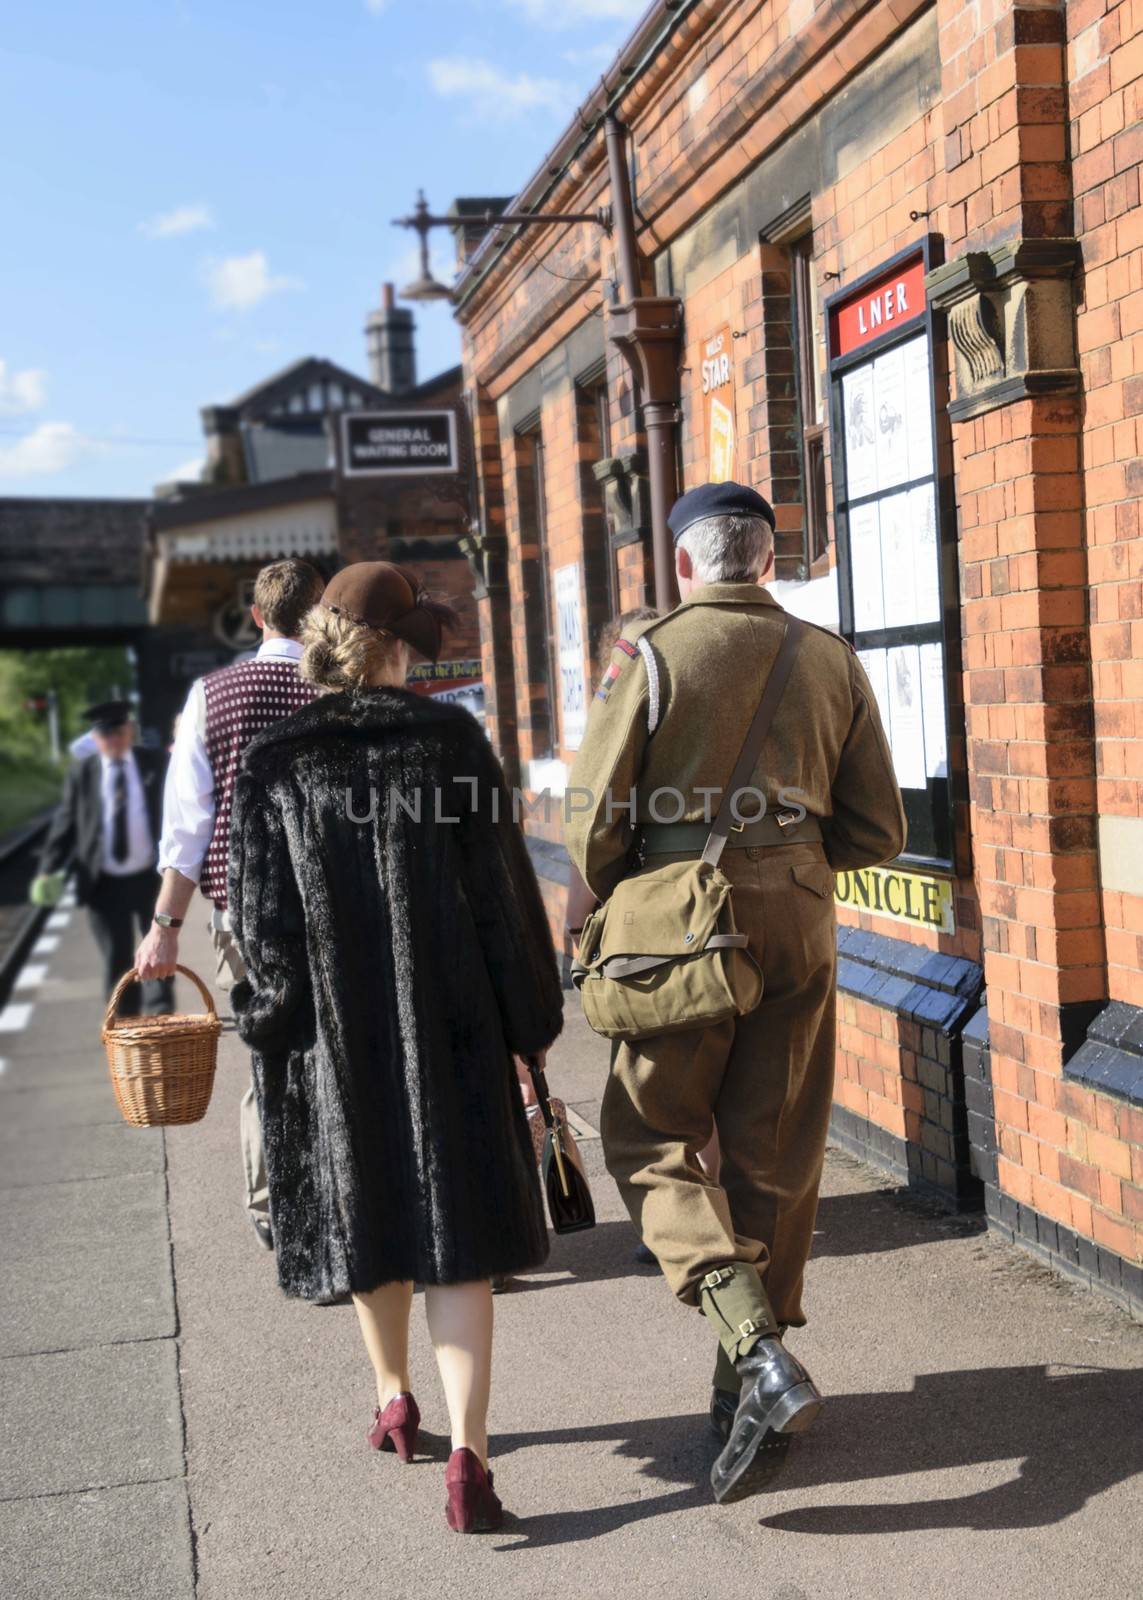 People in war time dress on train platform by mrs_vision